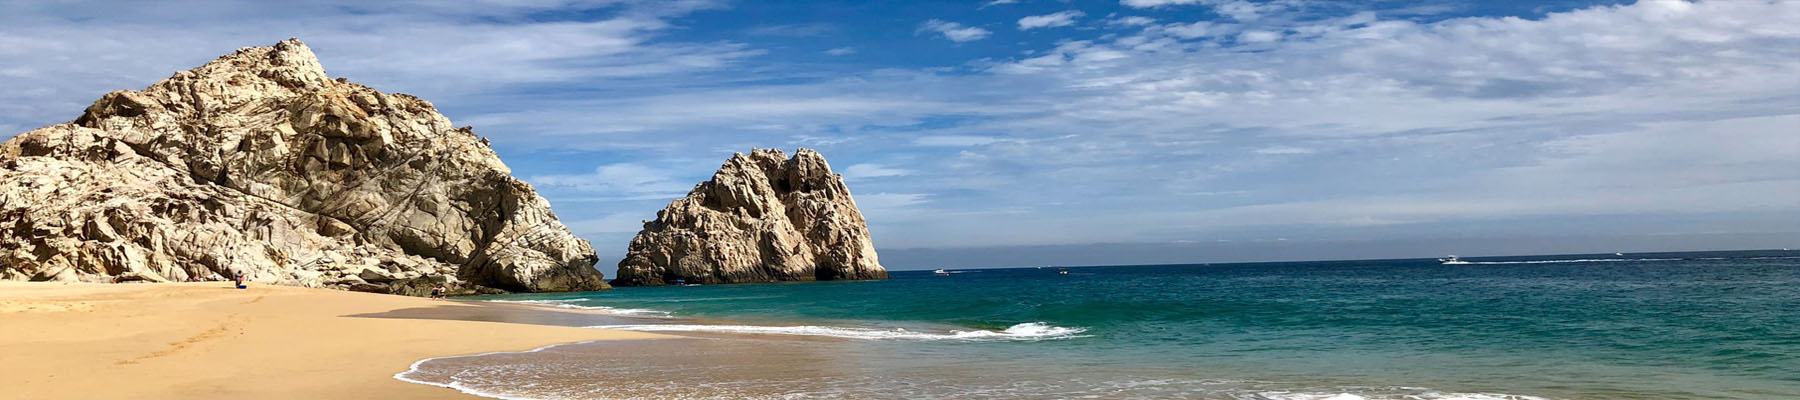 Picture of a beautiful beach in Cabo San Lucas, Mexico.  The picture shows tall rocks, a sandy beach, blue water and a blue sky with white clouds